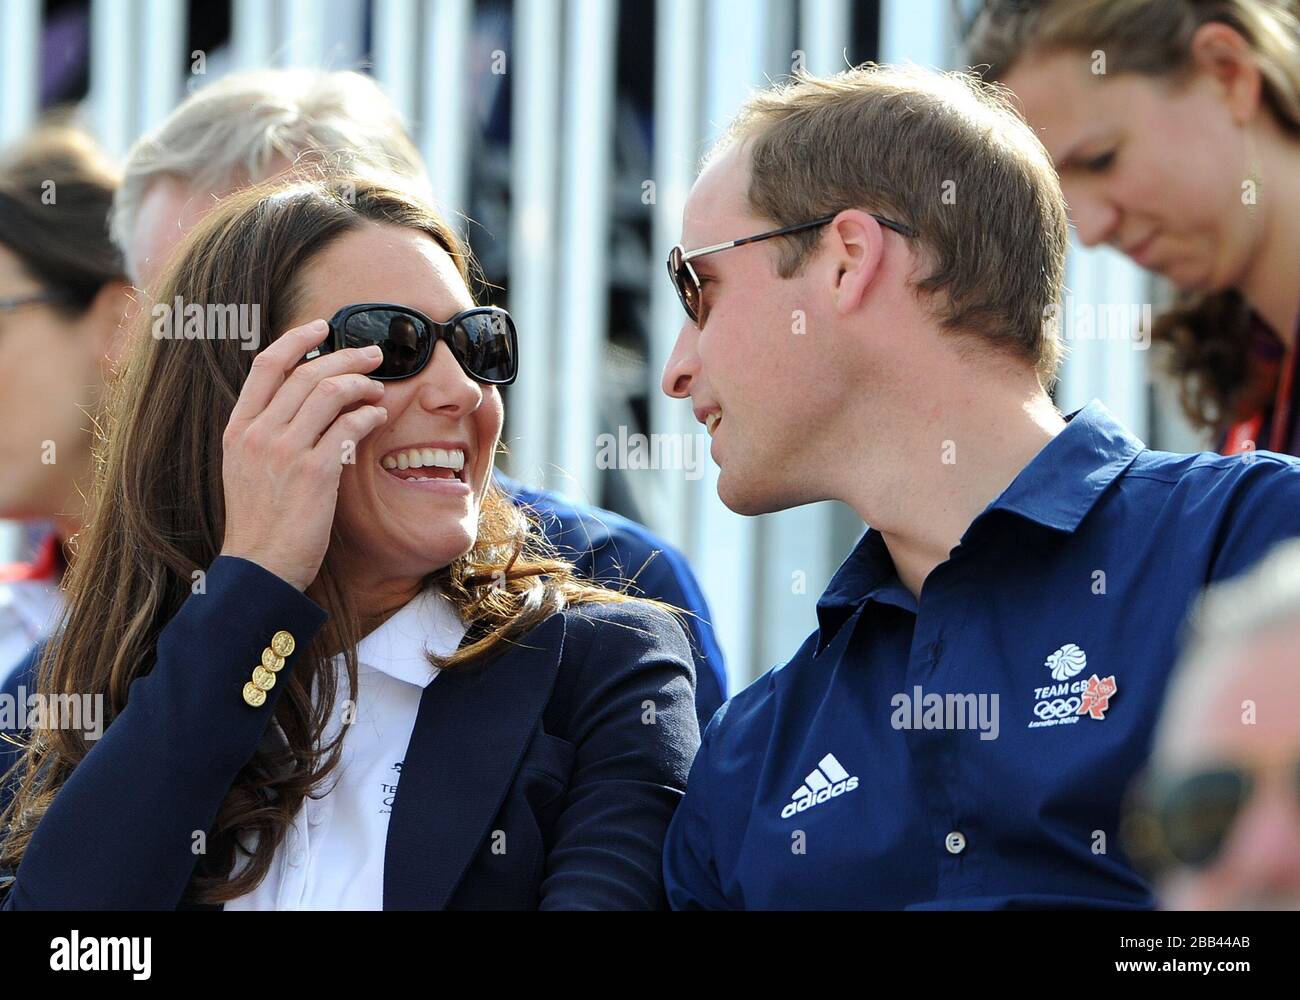 The Duke and Duchess of Cambridge as they watch the Cross Country Phase of The Eventing at Greenwich Park, on the third day of the London 2012 Olympics. Stock Photo